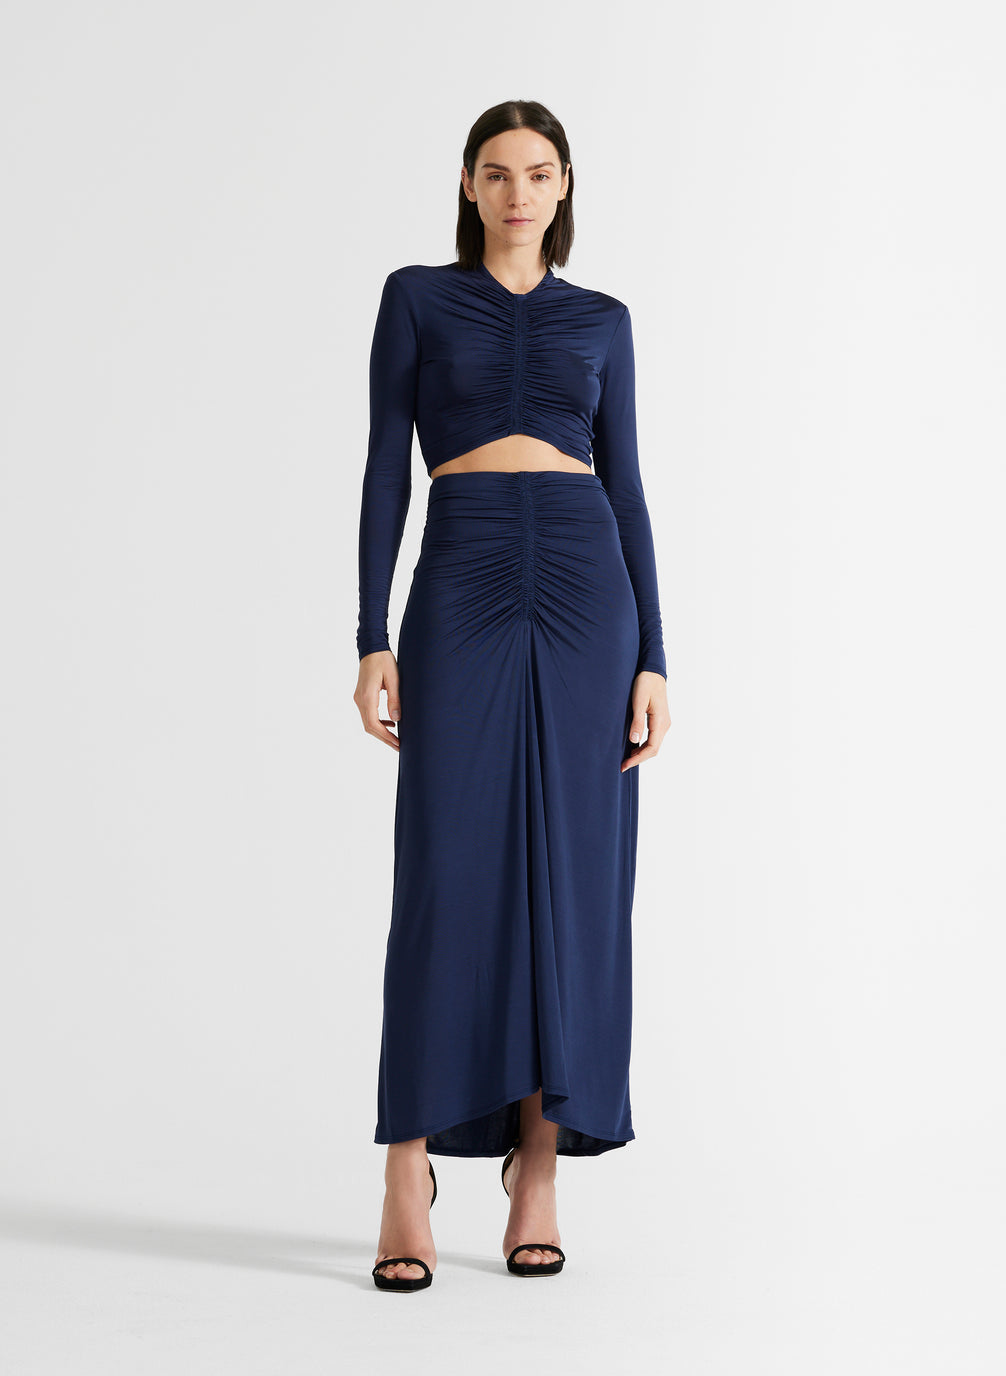 front view of woman in navy blue ruched crop top and matching navy blue maxi skirt